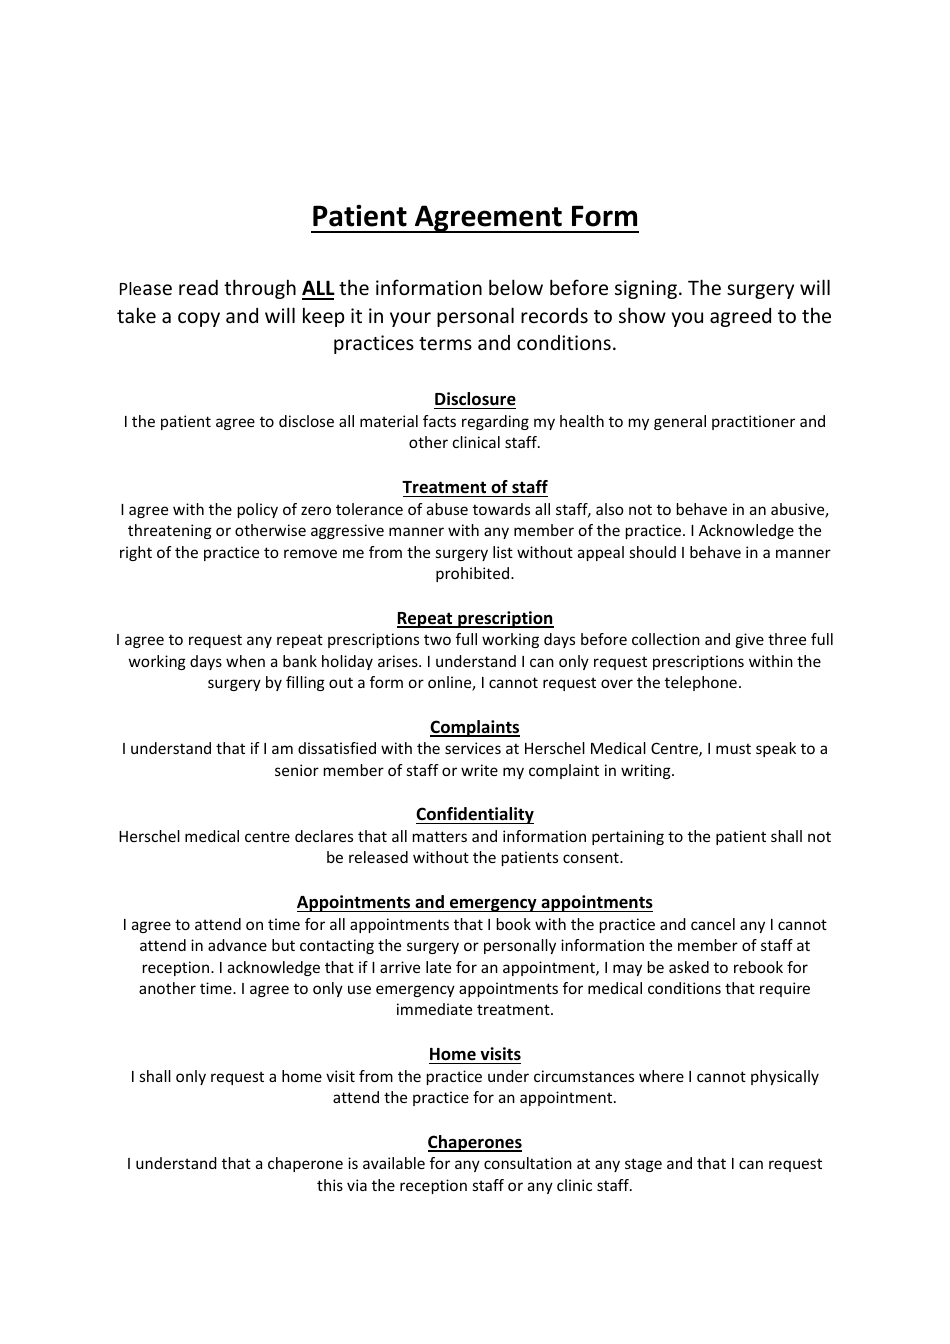 Patient Agreement Form - United Kingdom, Page 1